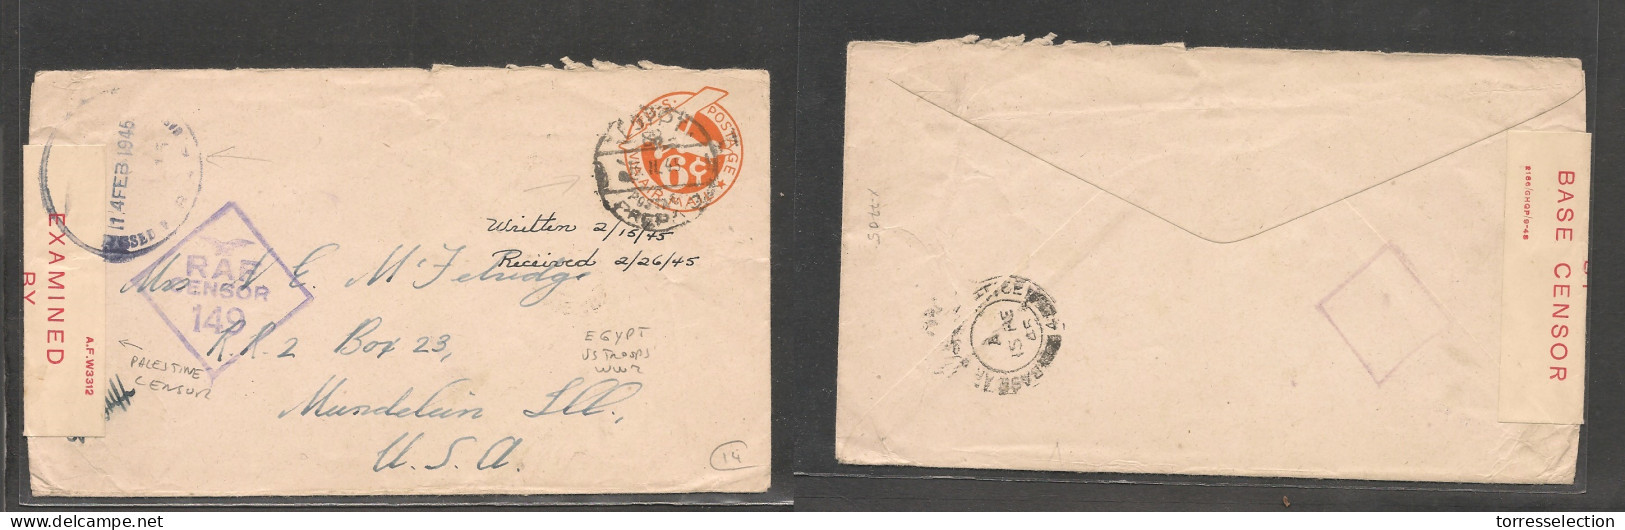 EGYPT. Egypt Cover - 1945 US Forces Stat Env Env To Mundelin, ILL, Palestine Censor Label XSALE. - Other & Unclassified